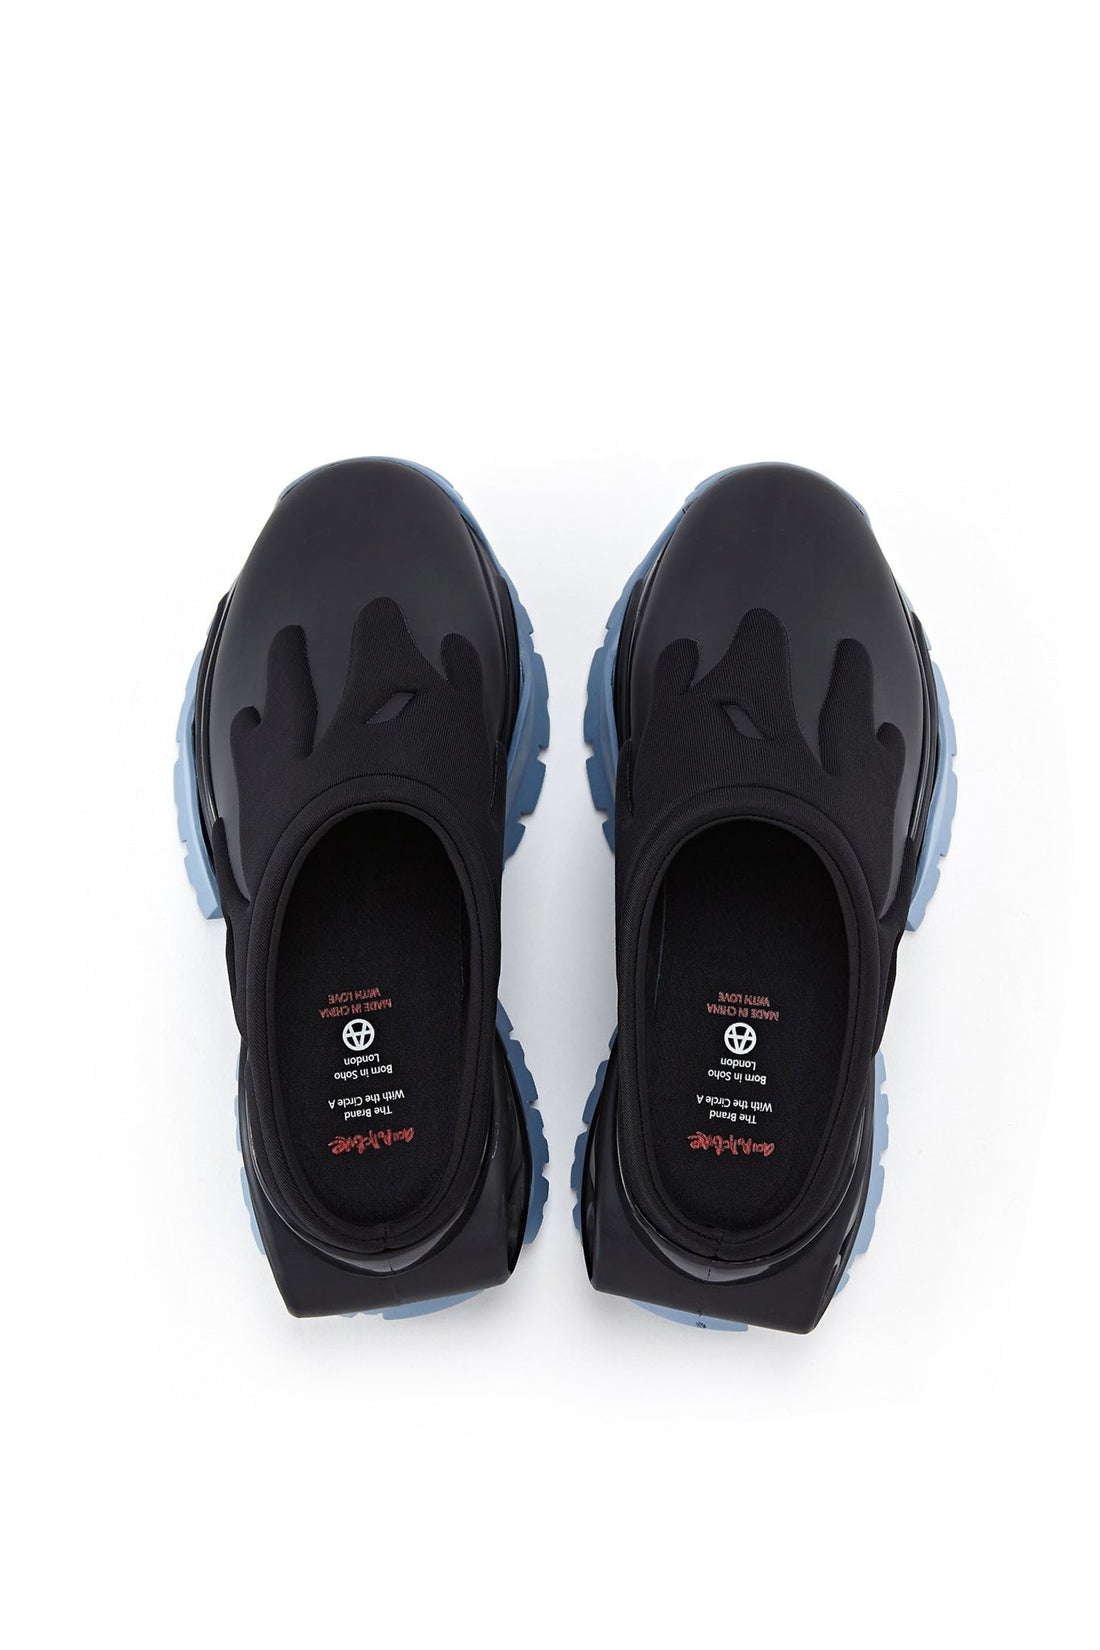 GINGER CLOG ON FIRE BLACK/BLUE Acupuncture